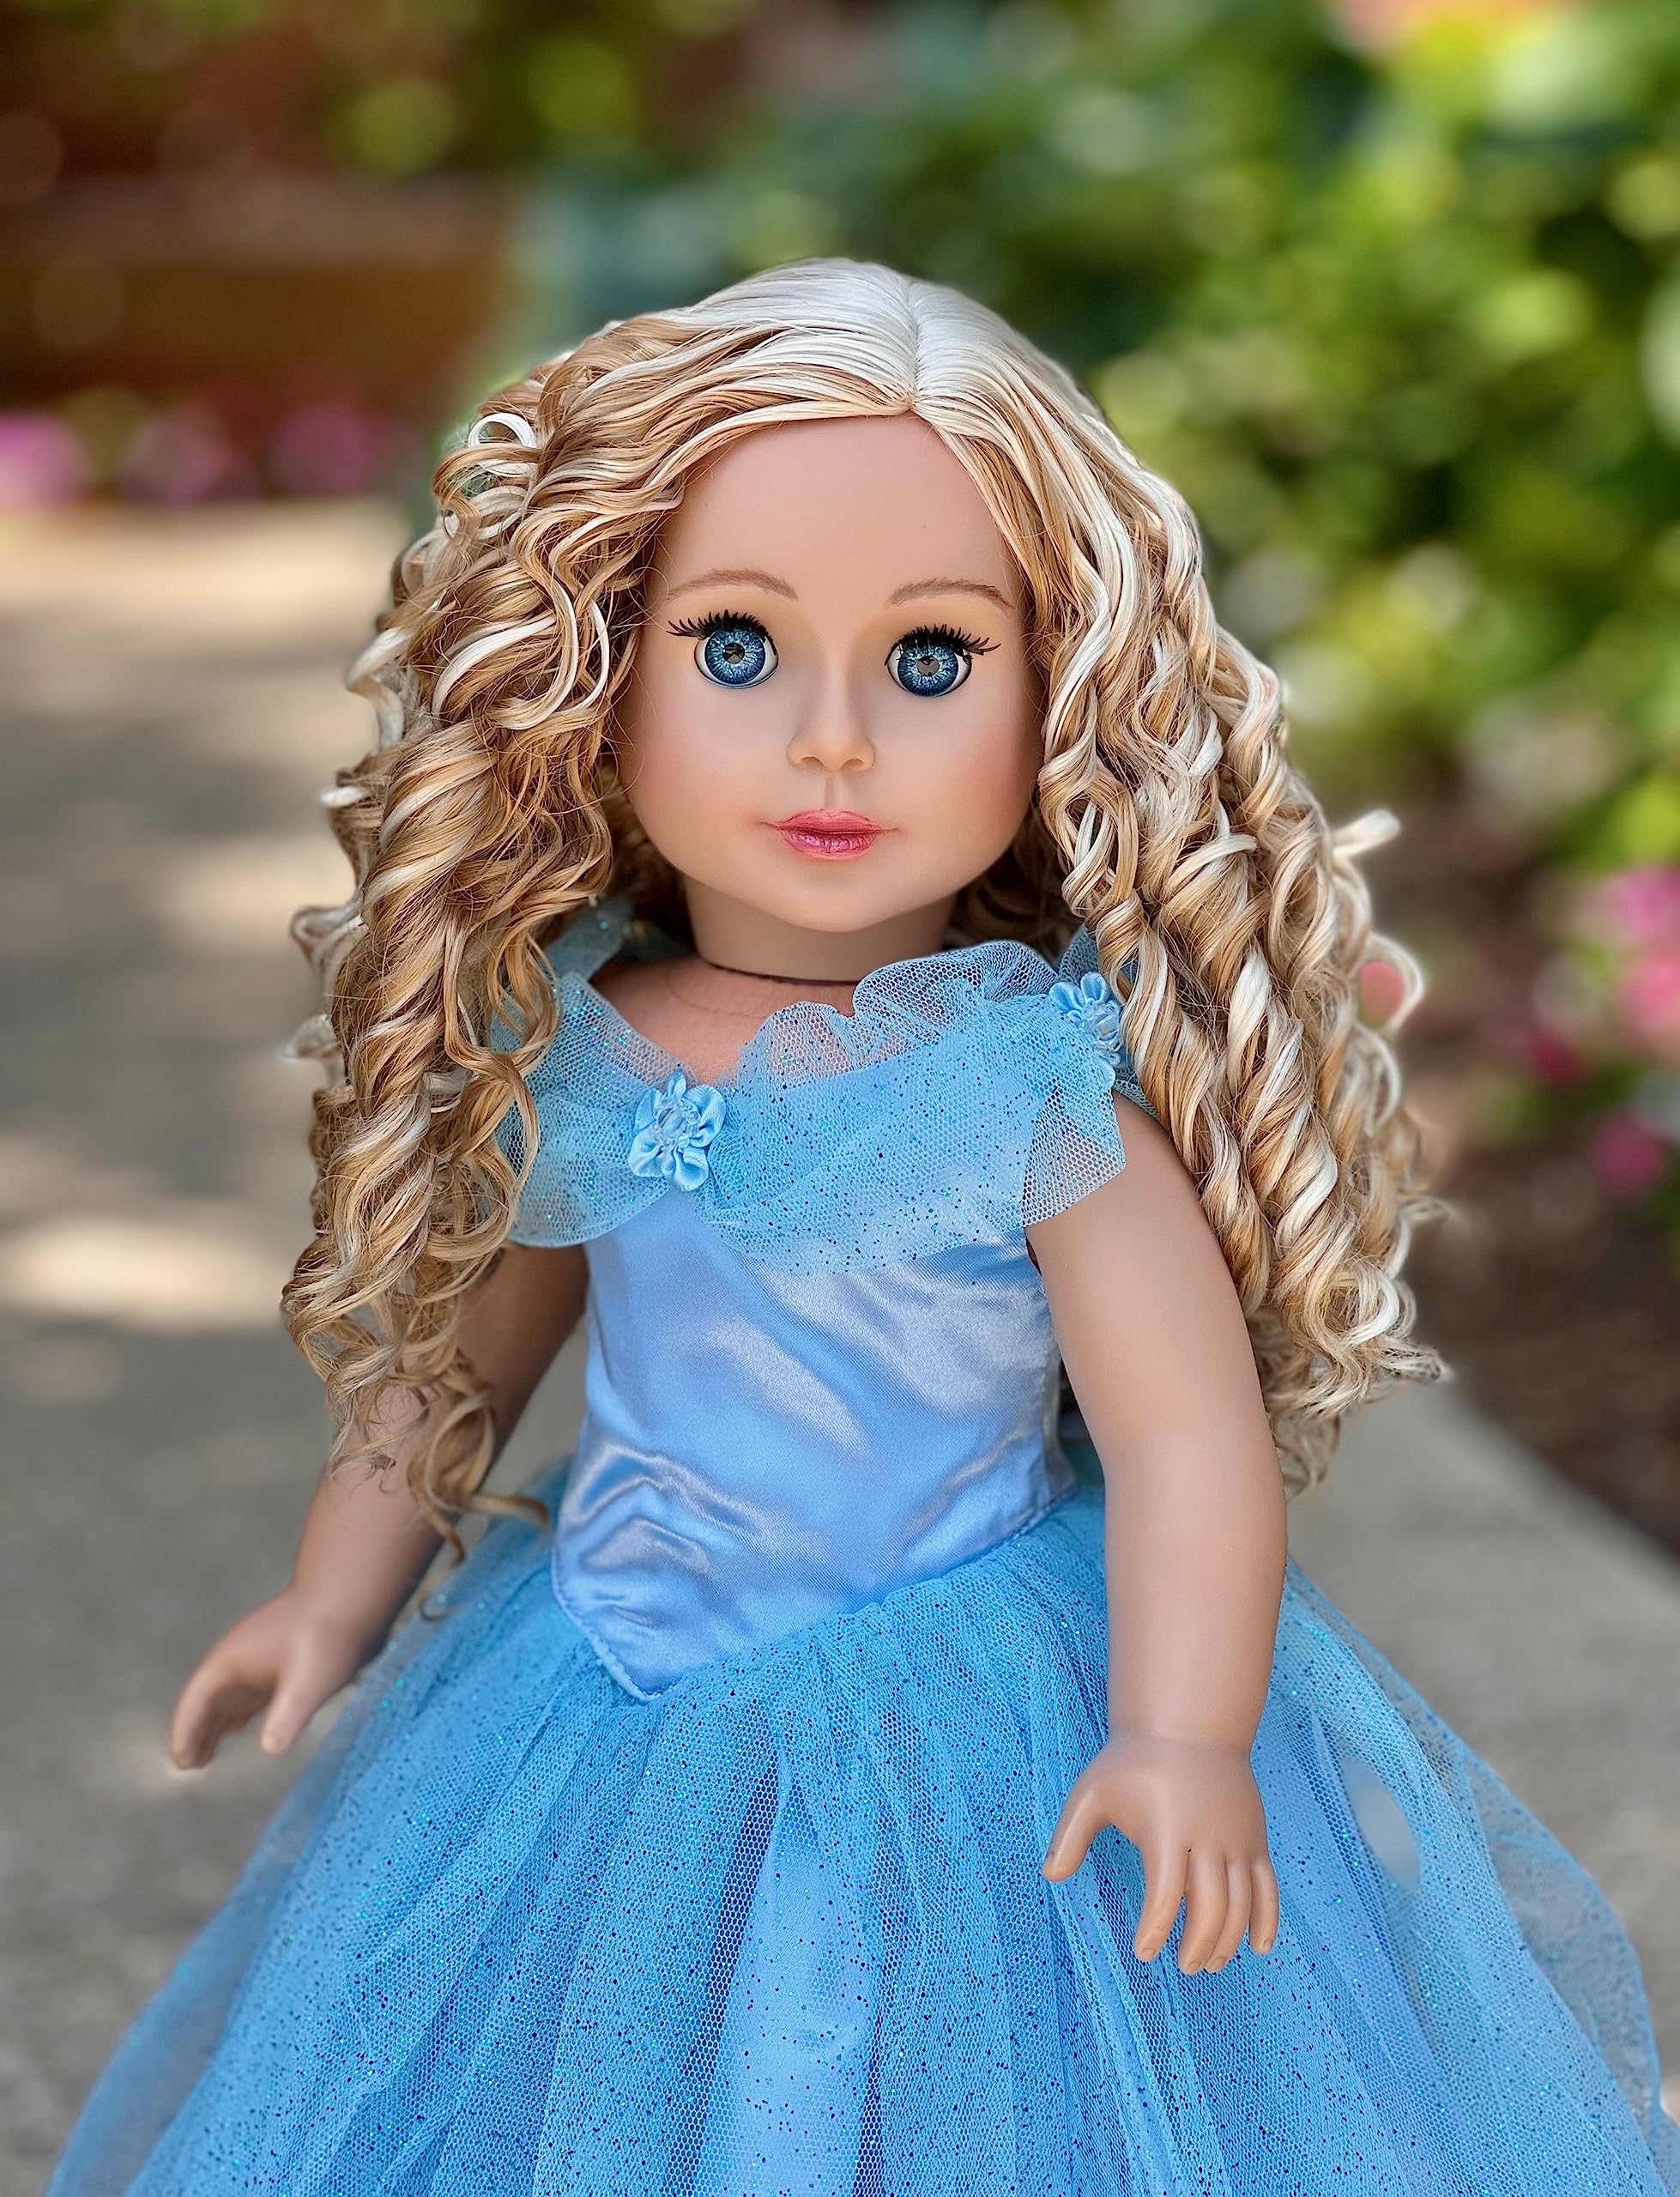 Blue Gown - 2 Piece Outfit - Blue Gown, Silver Slippers - Clothes Fits 18 Inch Doll (Doll Not Included)